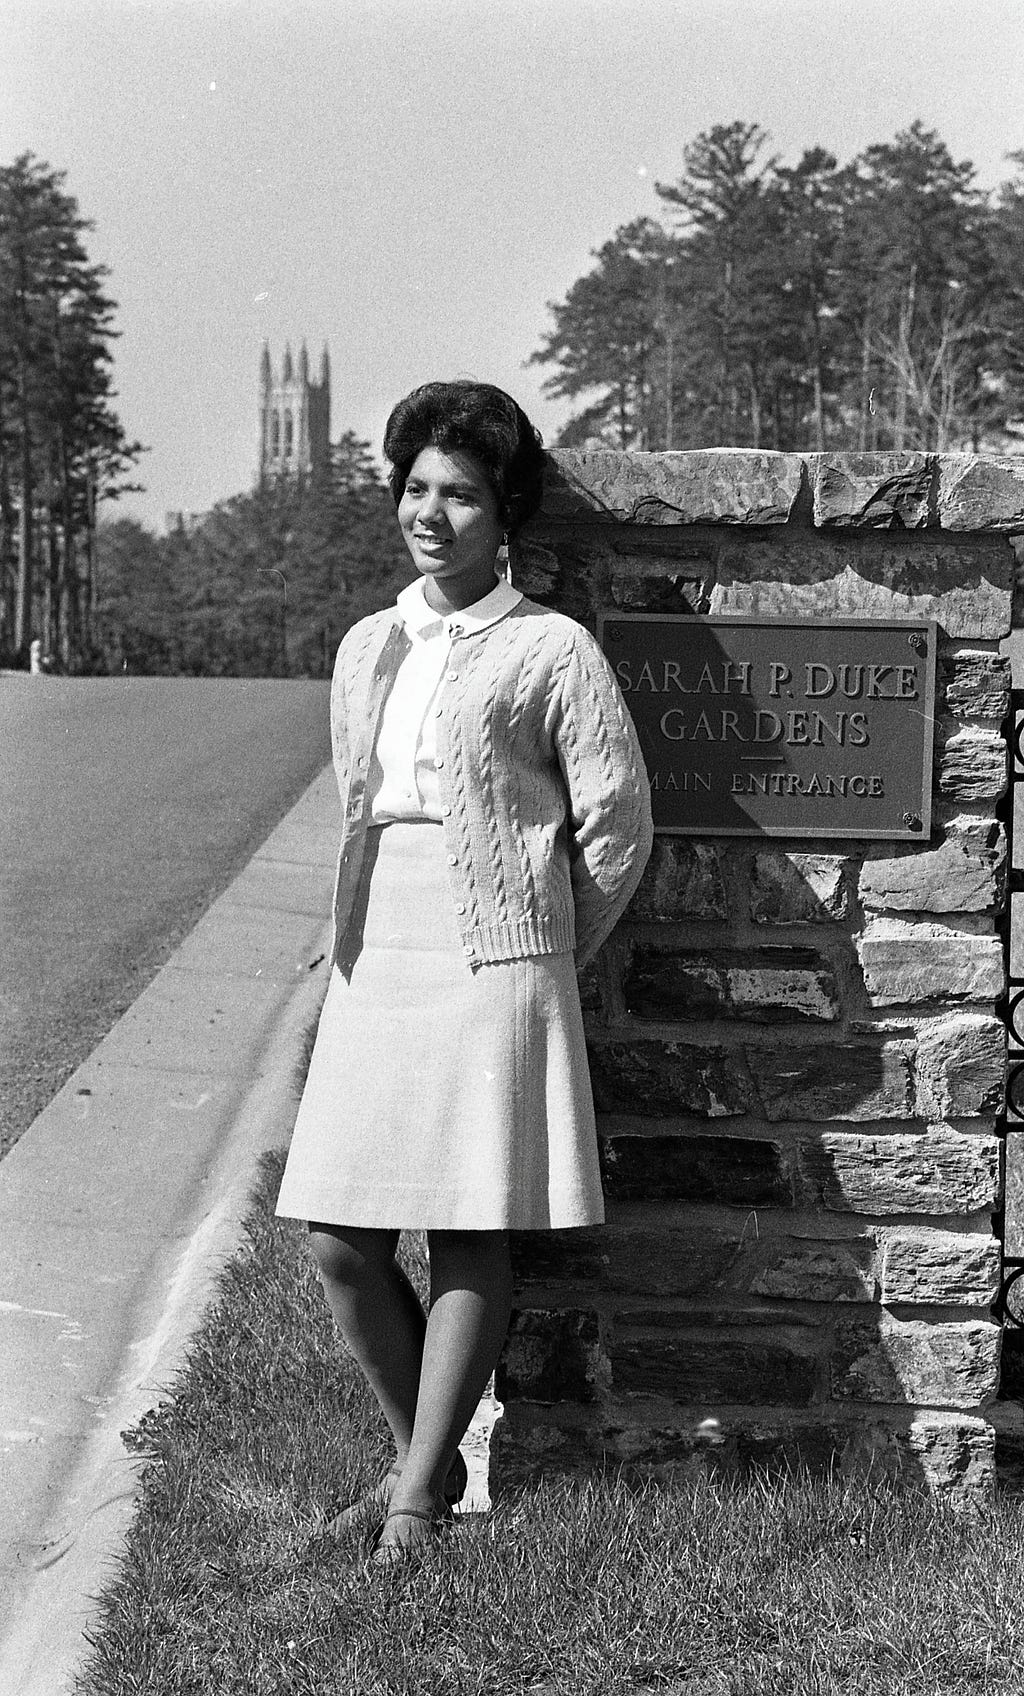 Wilhelmina Reuben, May Queen 1967, leans on a stone column with a plaque that says, “Sarah P. Duke Gardens, Main Entrance.”